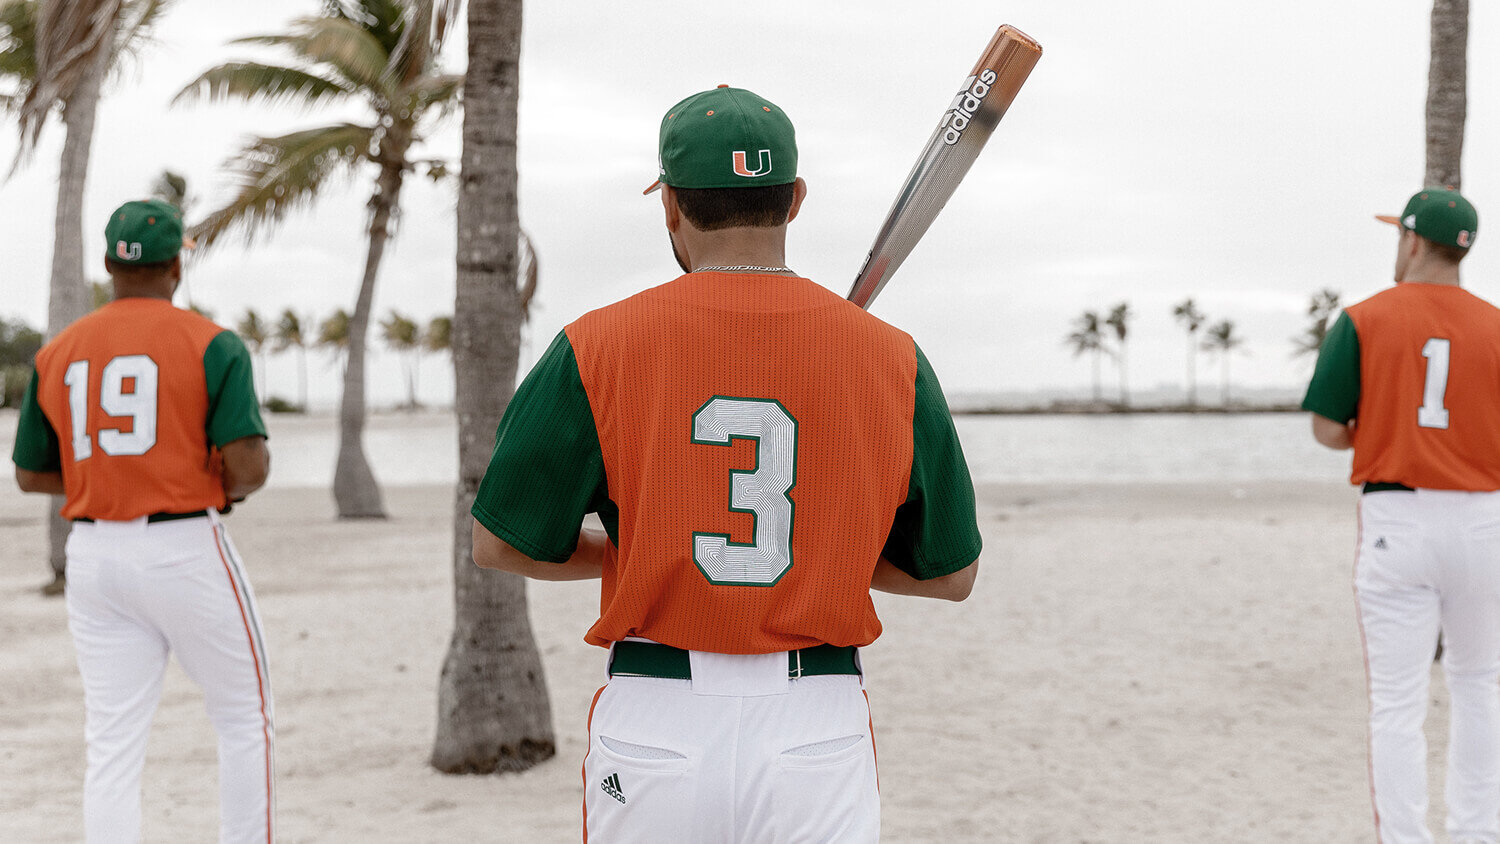 Miami Hurricanes to Wear Uniforms Made from Marine Plastic